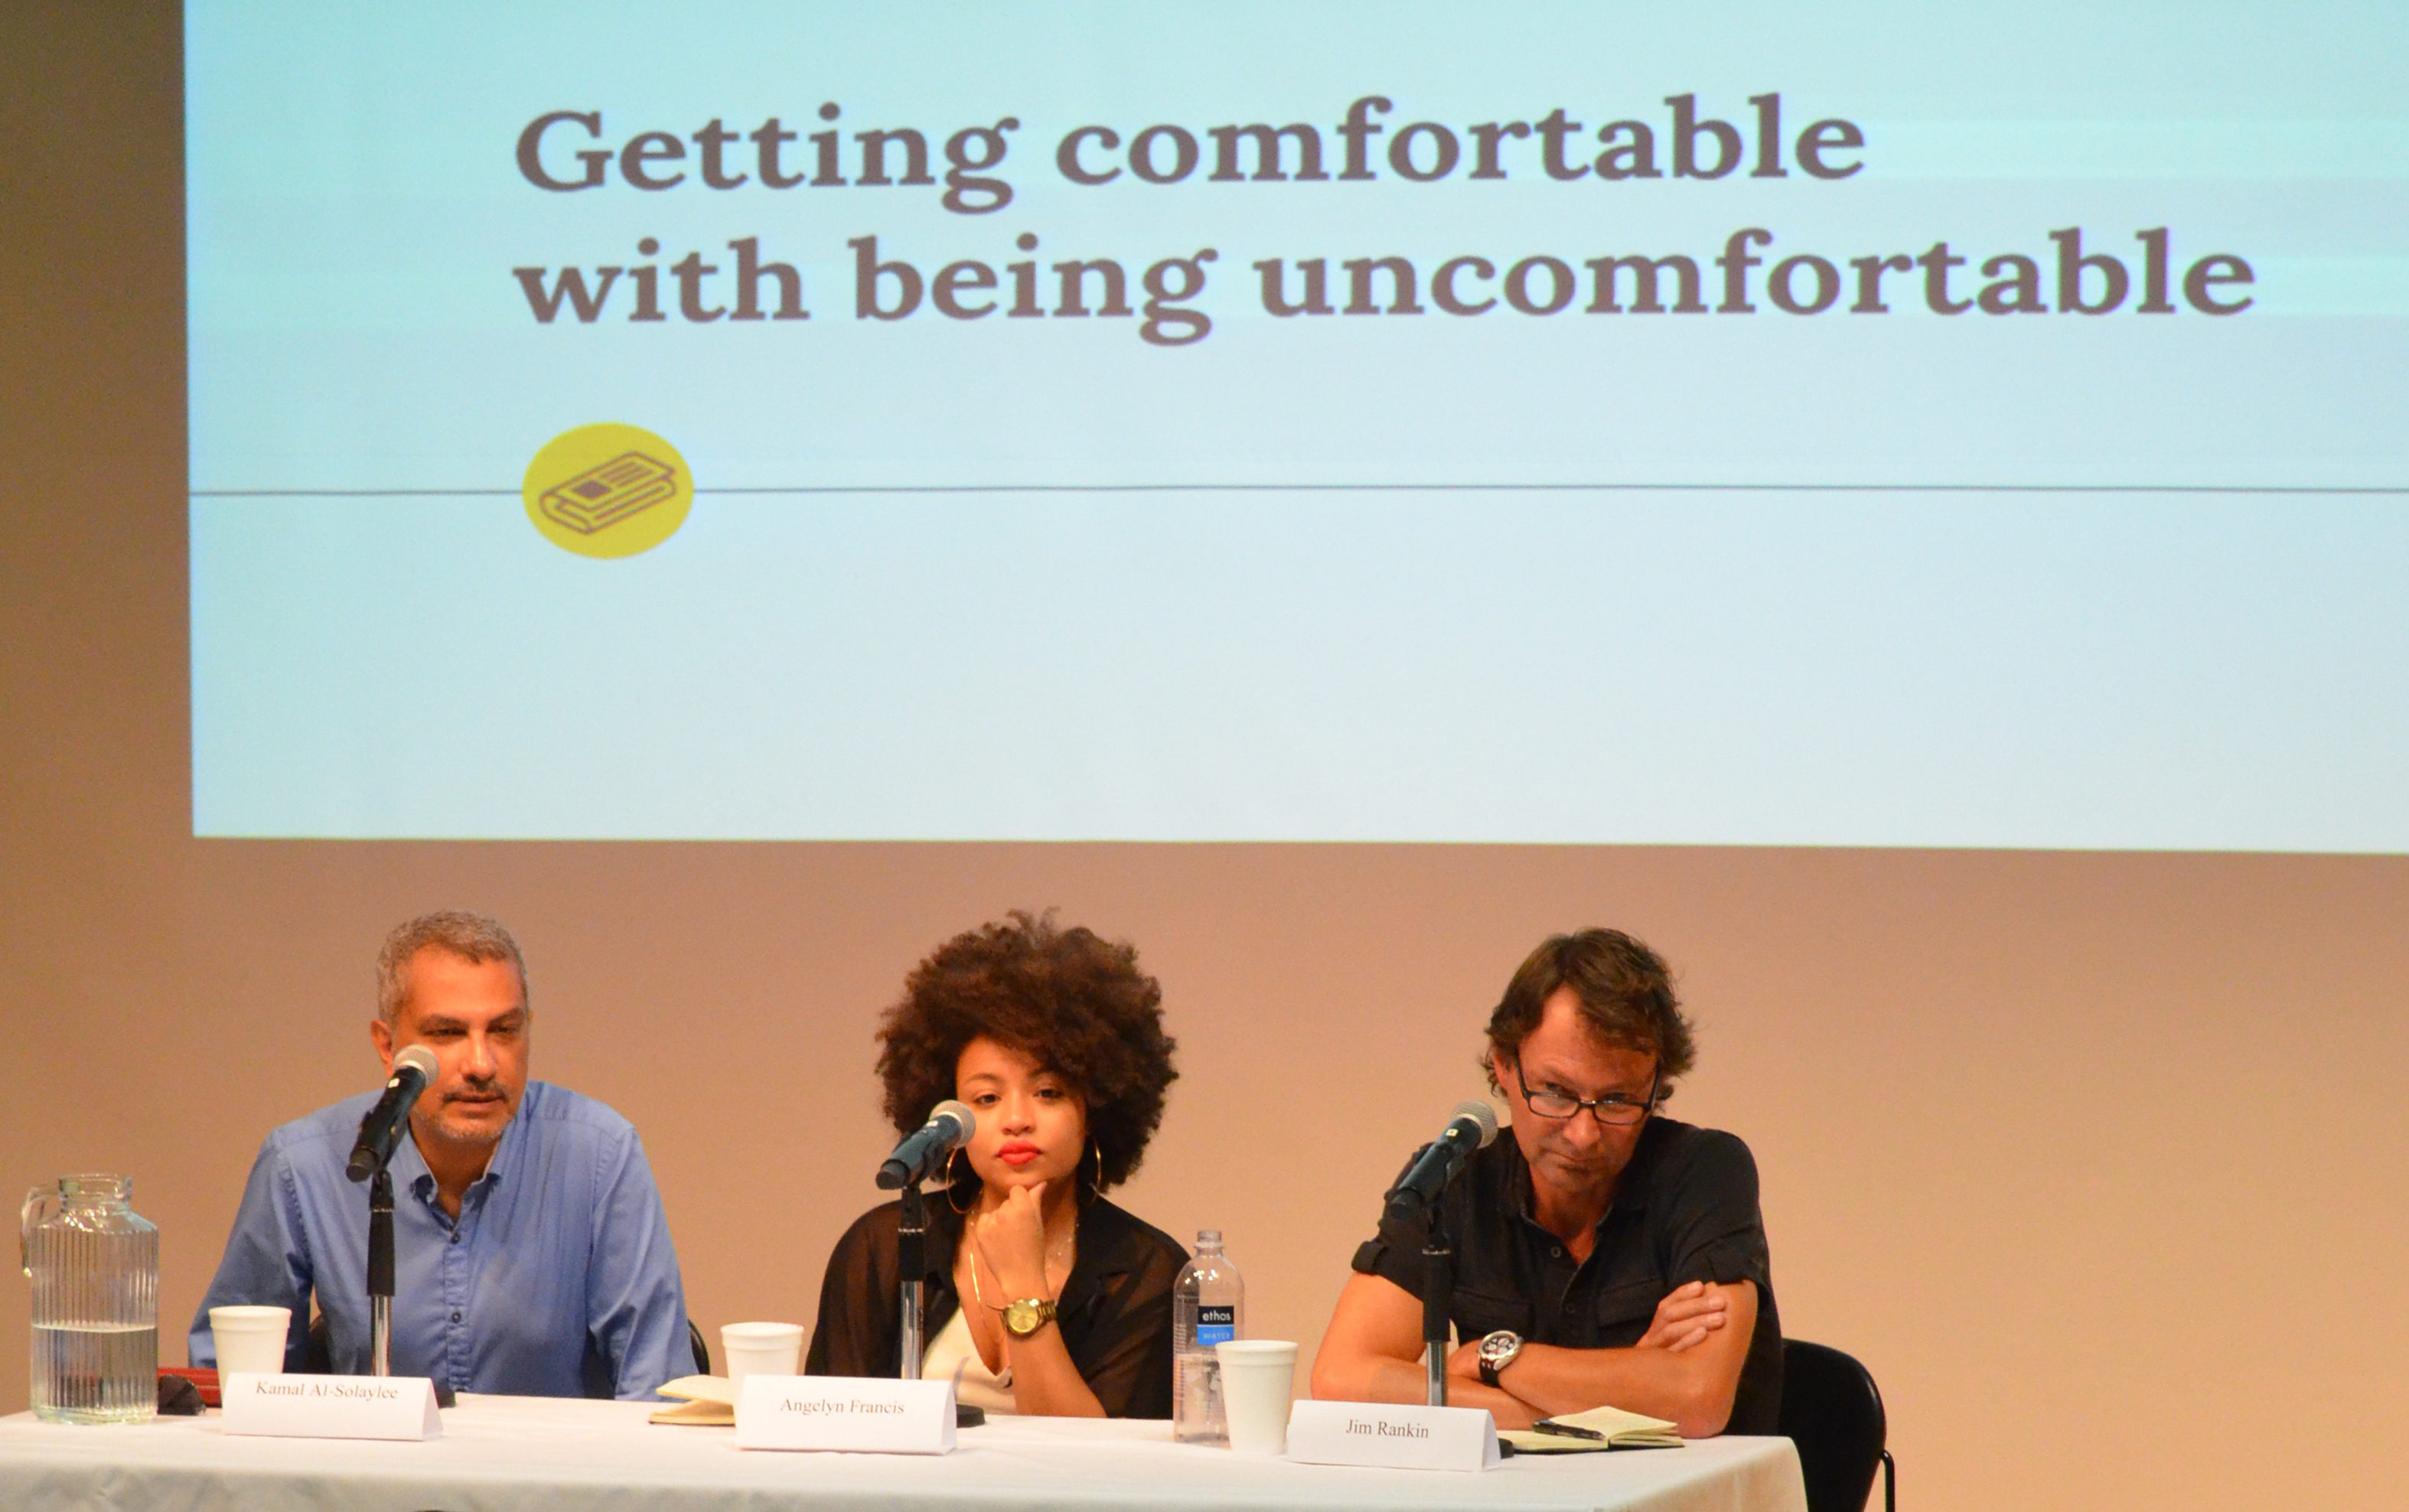 Kamal Al-Solaylee, Angelyn Francis and Jim Rankin discuss how reporters can get comfortable while covering controversial stories at an RJRC panel.